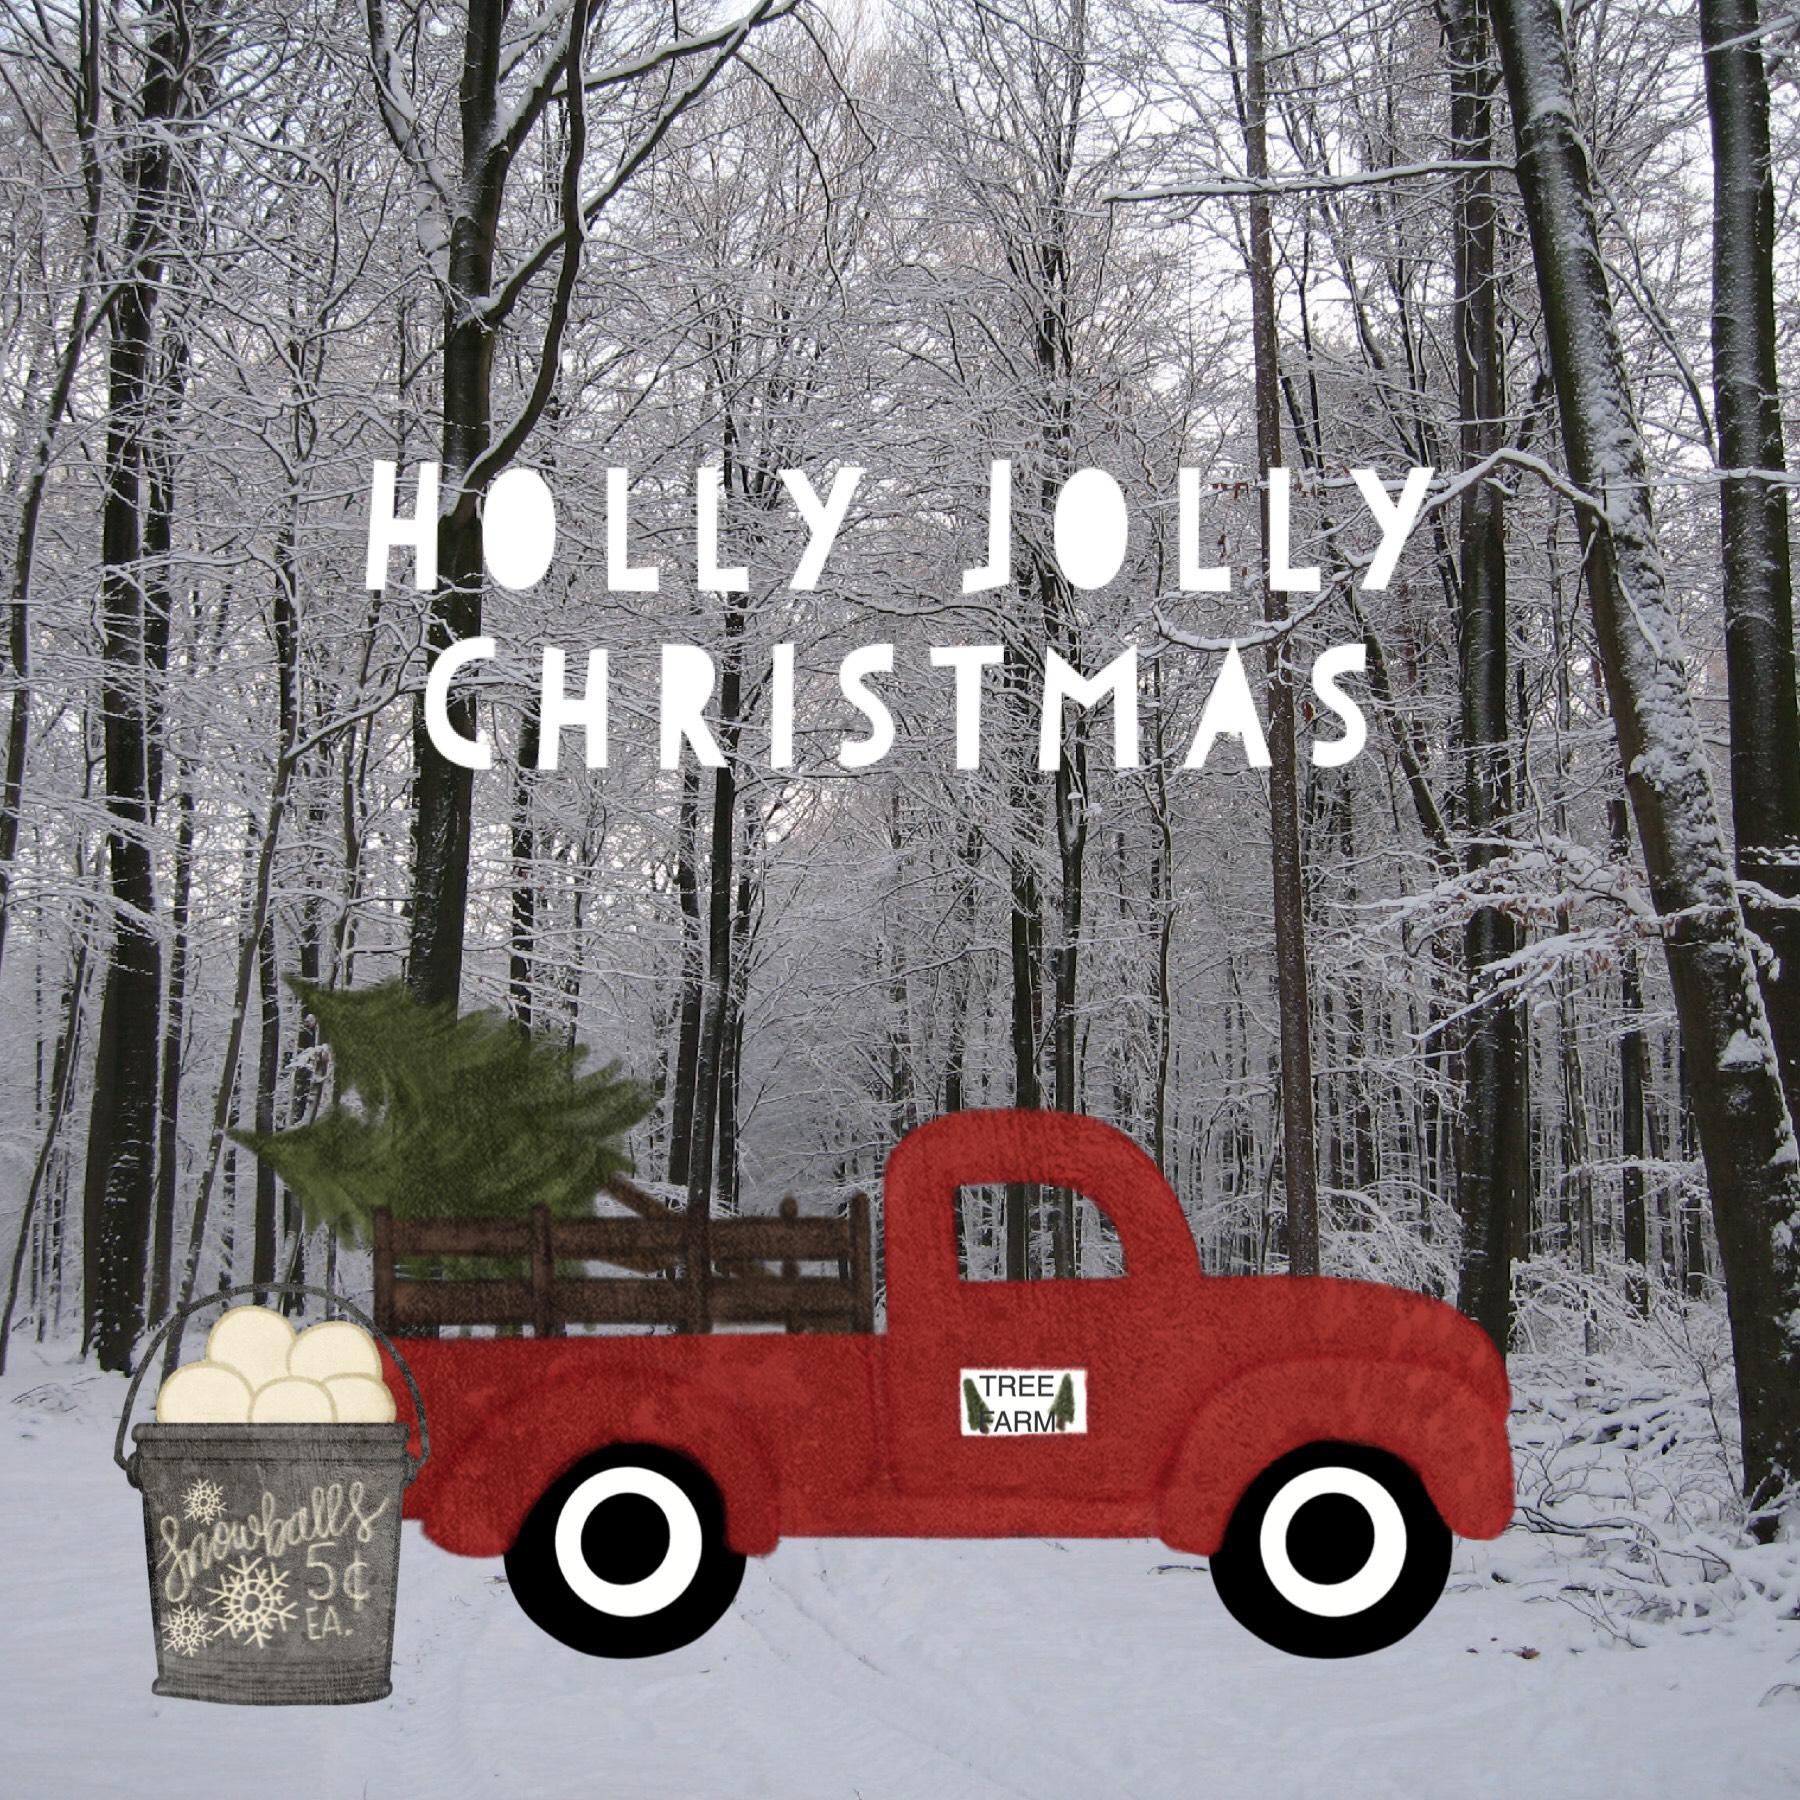 #HollyJollyChristmas now available in the sticker shop! @piccollage @prisillay #christmas #piccollage @everestandgray